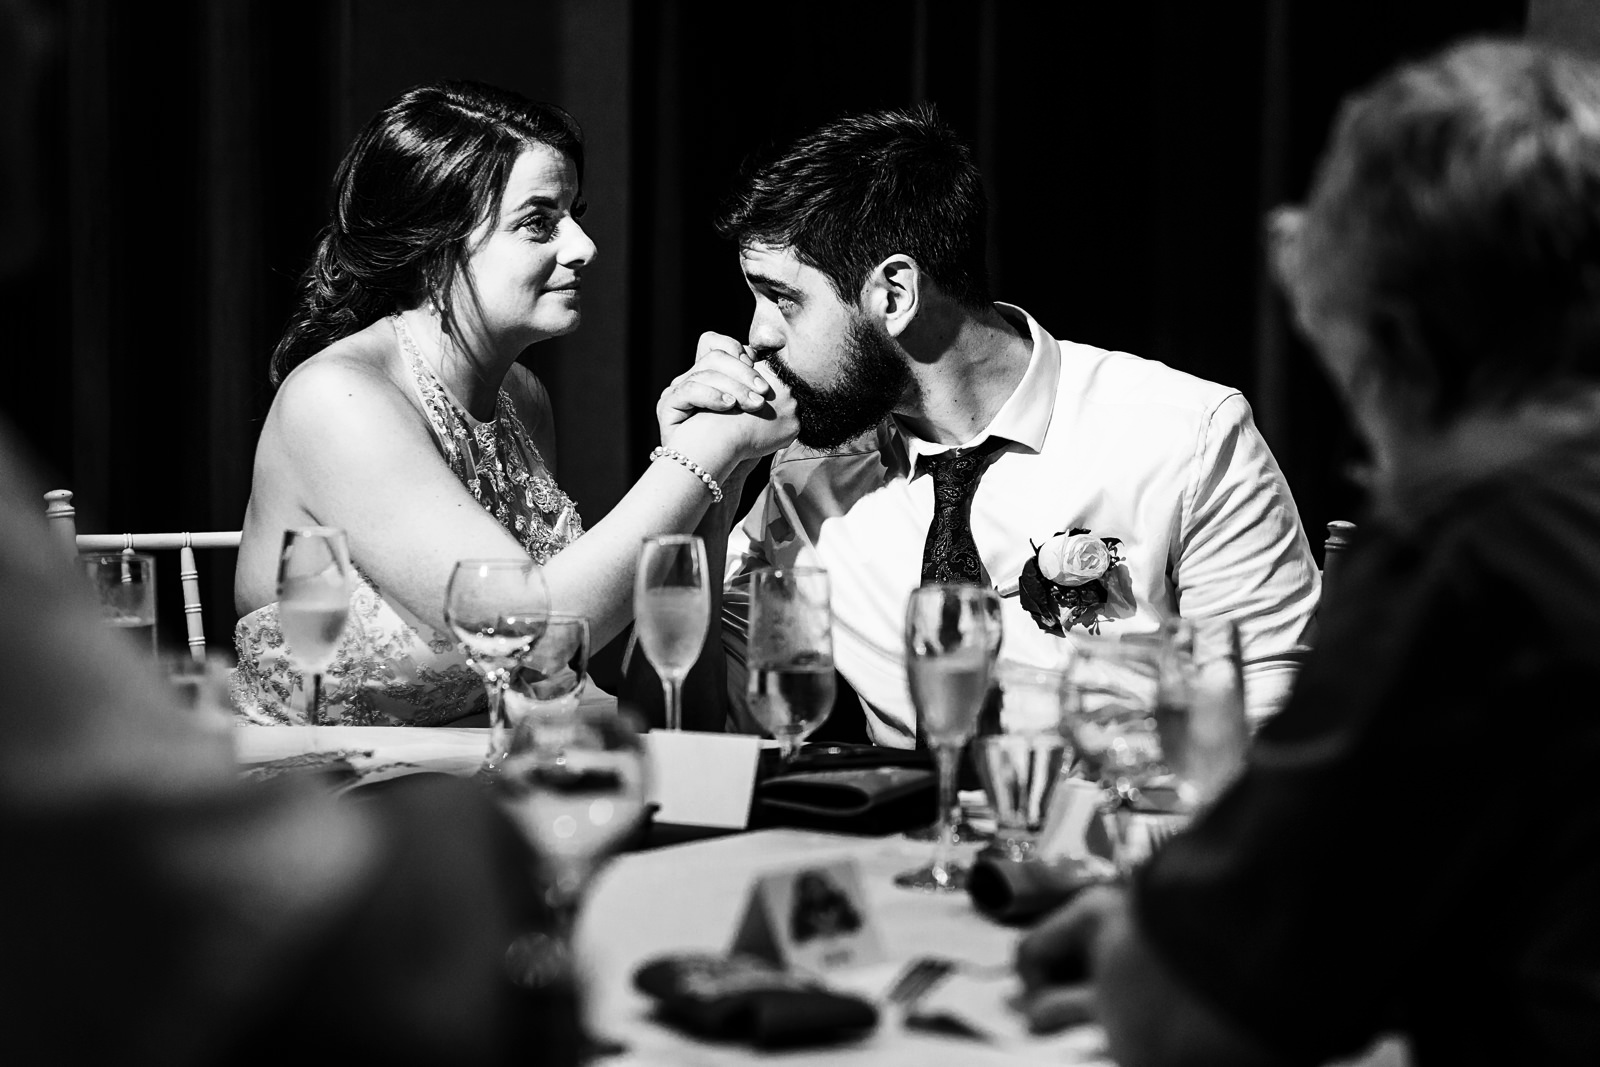 Groom kisses his bride’s hand during the speeches at the dinner table.